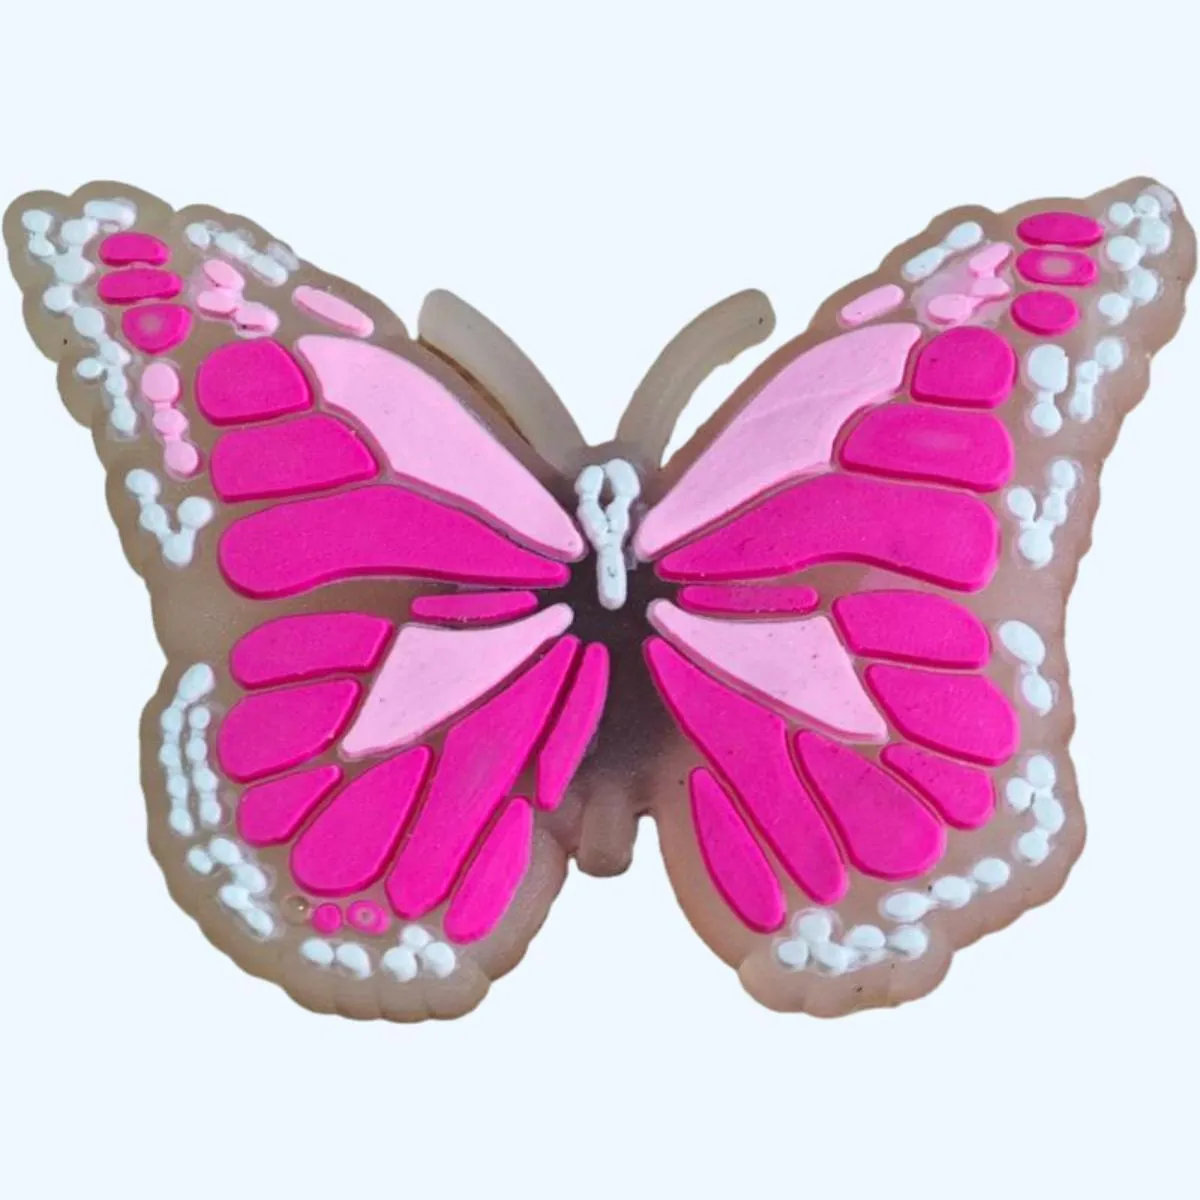  shoe charms for  decoration funny glow in the dark butterfly diy shoes pins for kids boys girls teens men women and adults christmas birthday gifts